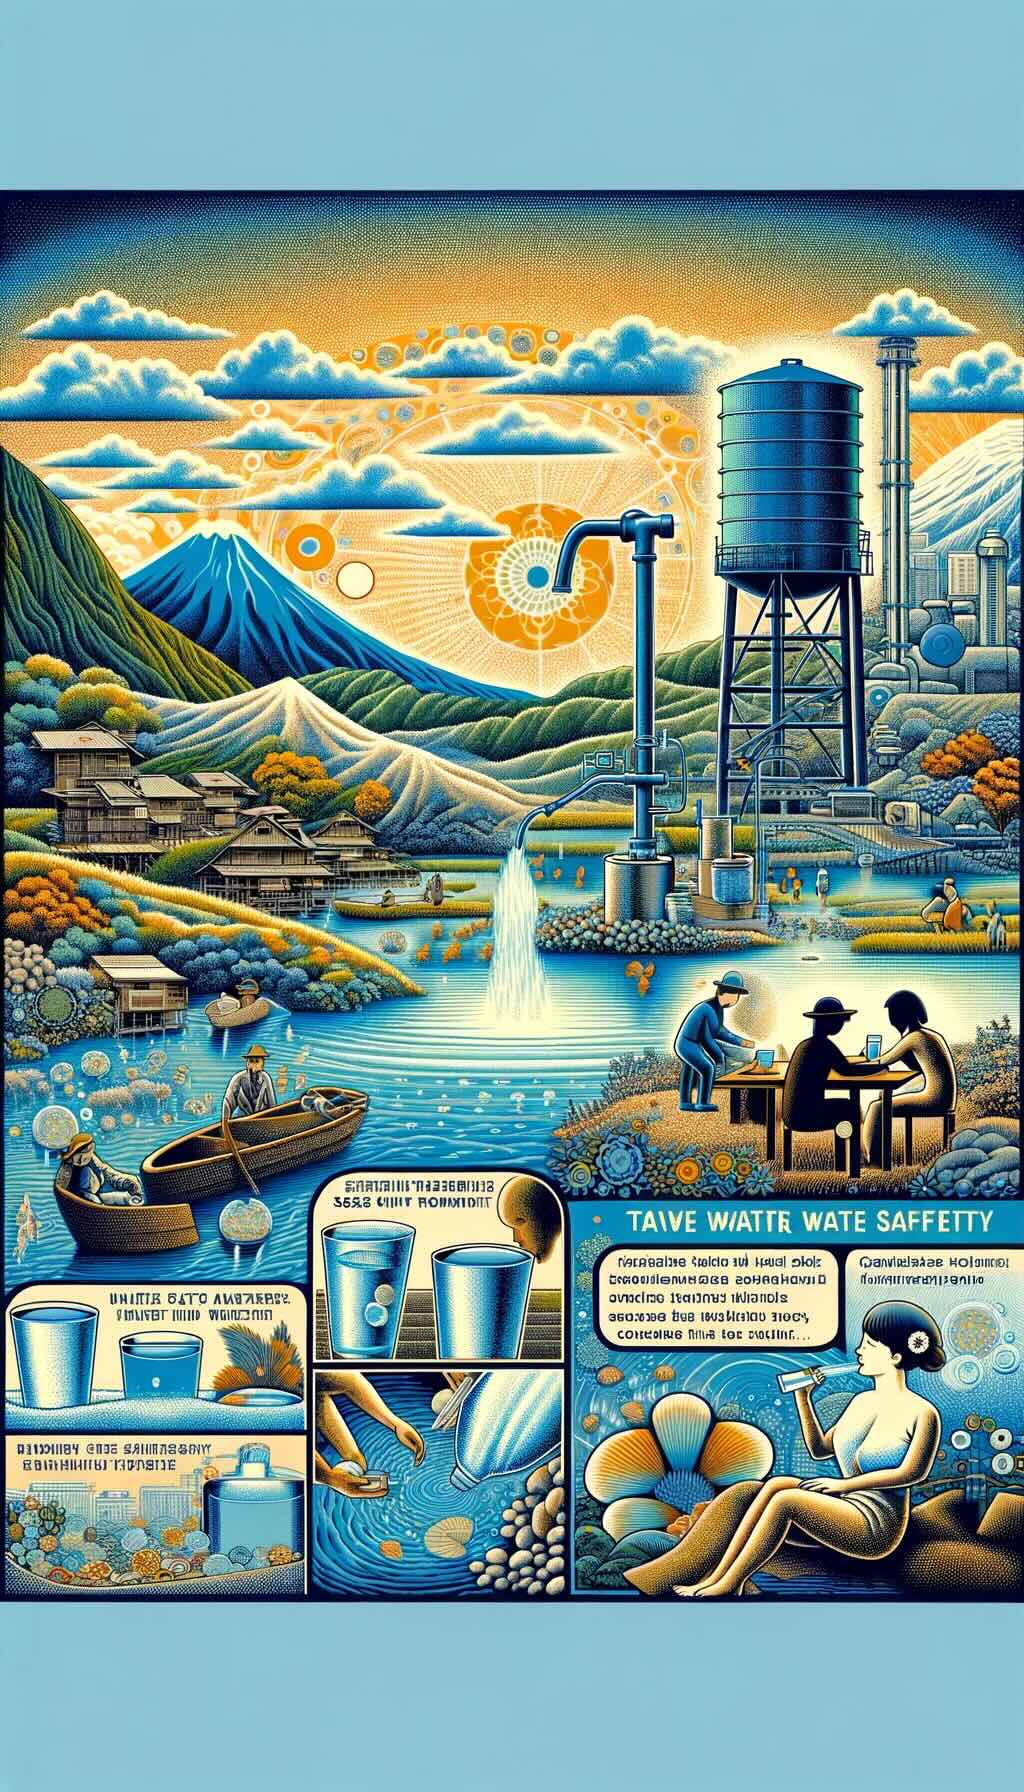 Exploring the health benefits of drinking tap water in Japan and addressing concerns about contaminants depicts the purity and safety of Japanese tap water, emphasizing its benefits for health and wellness. It includes scenes of travelers drinking tap water while exploring various Japanese landscapes and visuals representing advanced water treatment methods ensuring the water's safety. The image also offers tips for sensitive travelers, like using travel water filters conveys the theme of healthful hydration and safety in the context of travel in Japan.